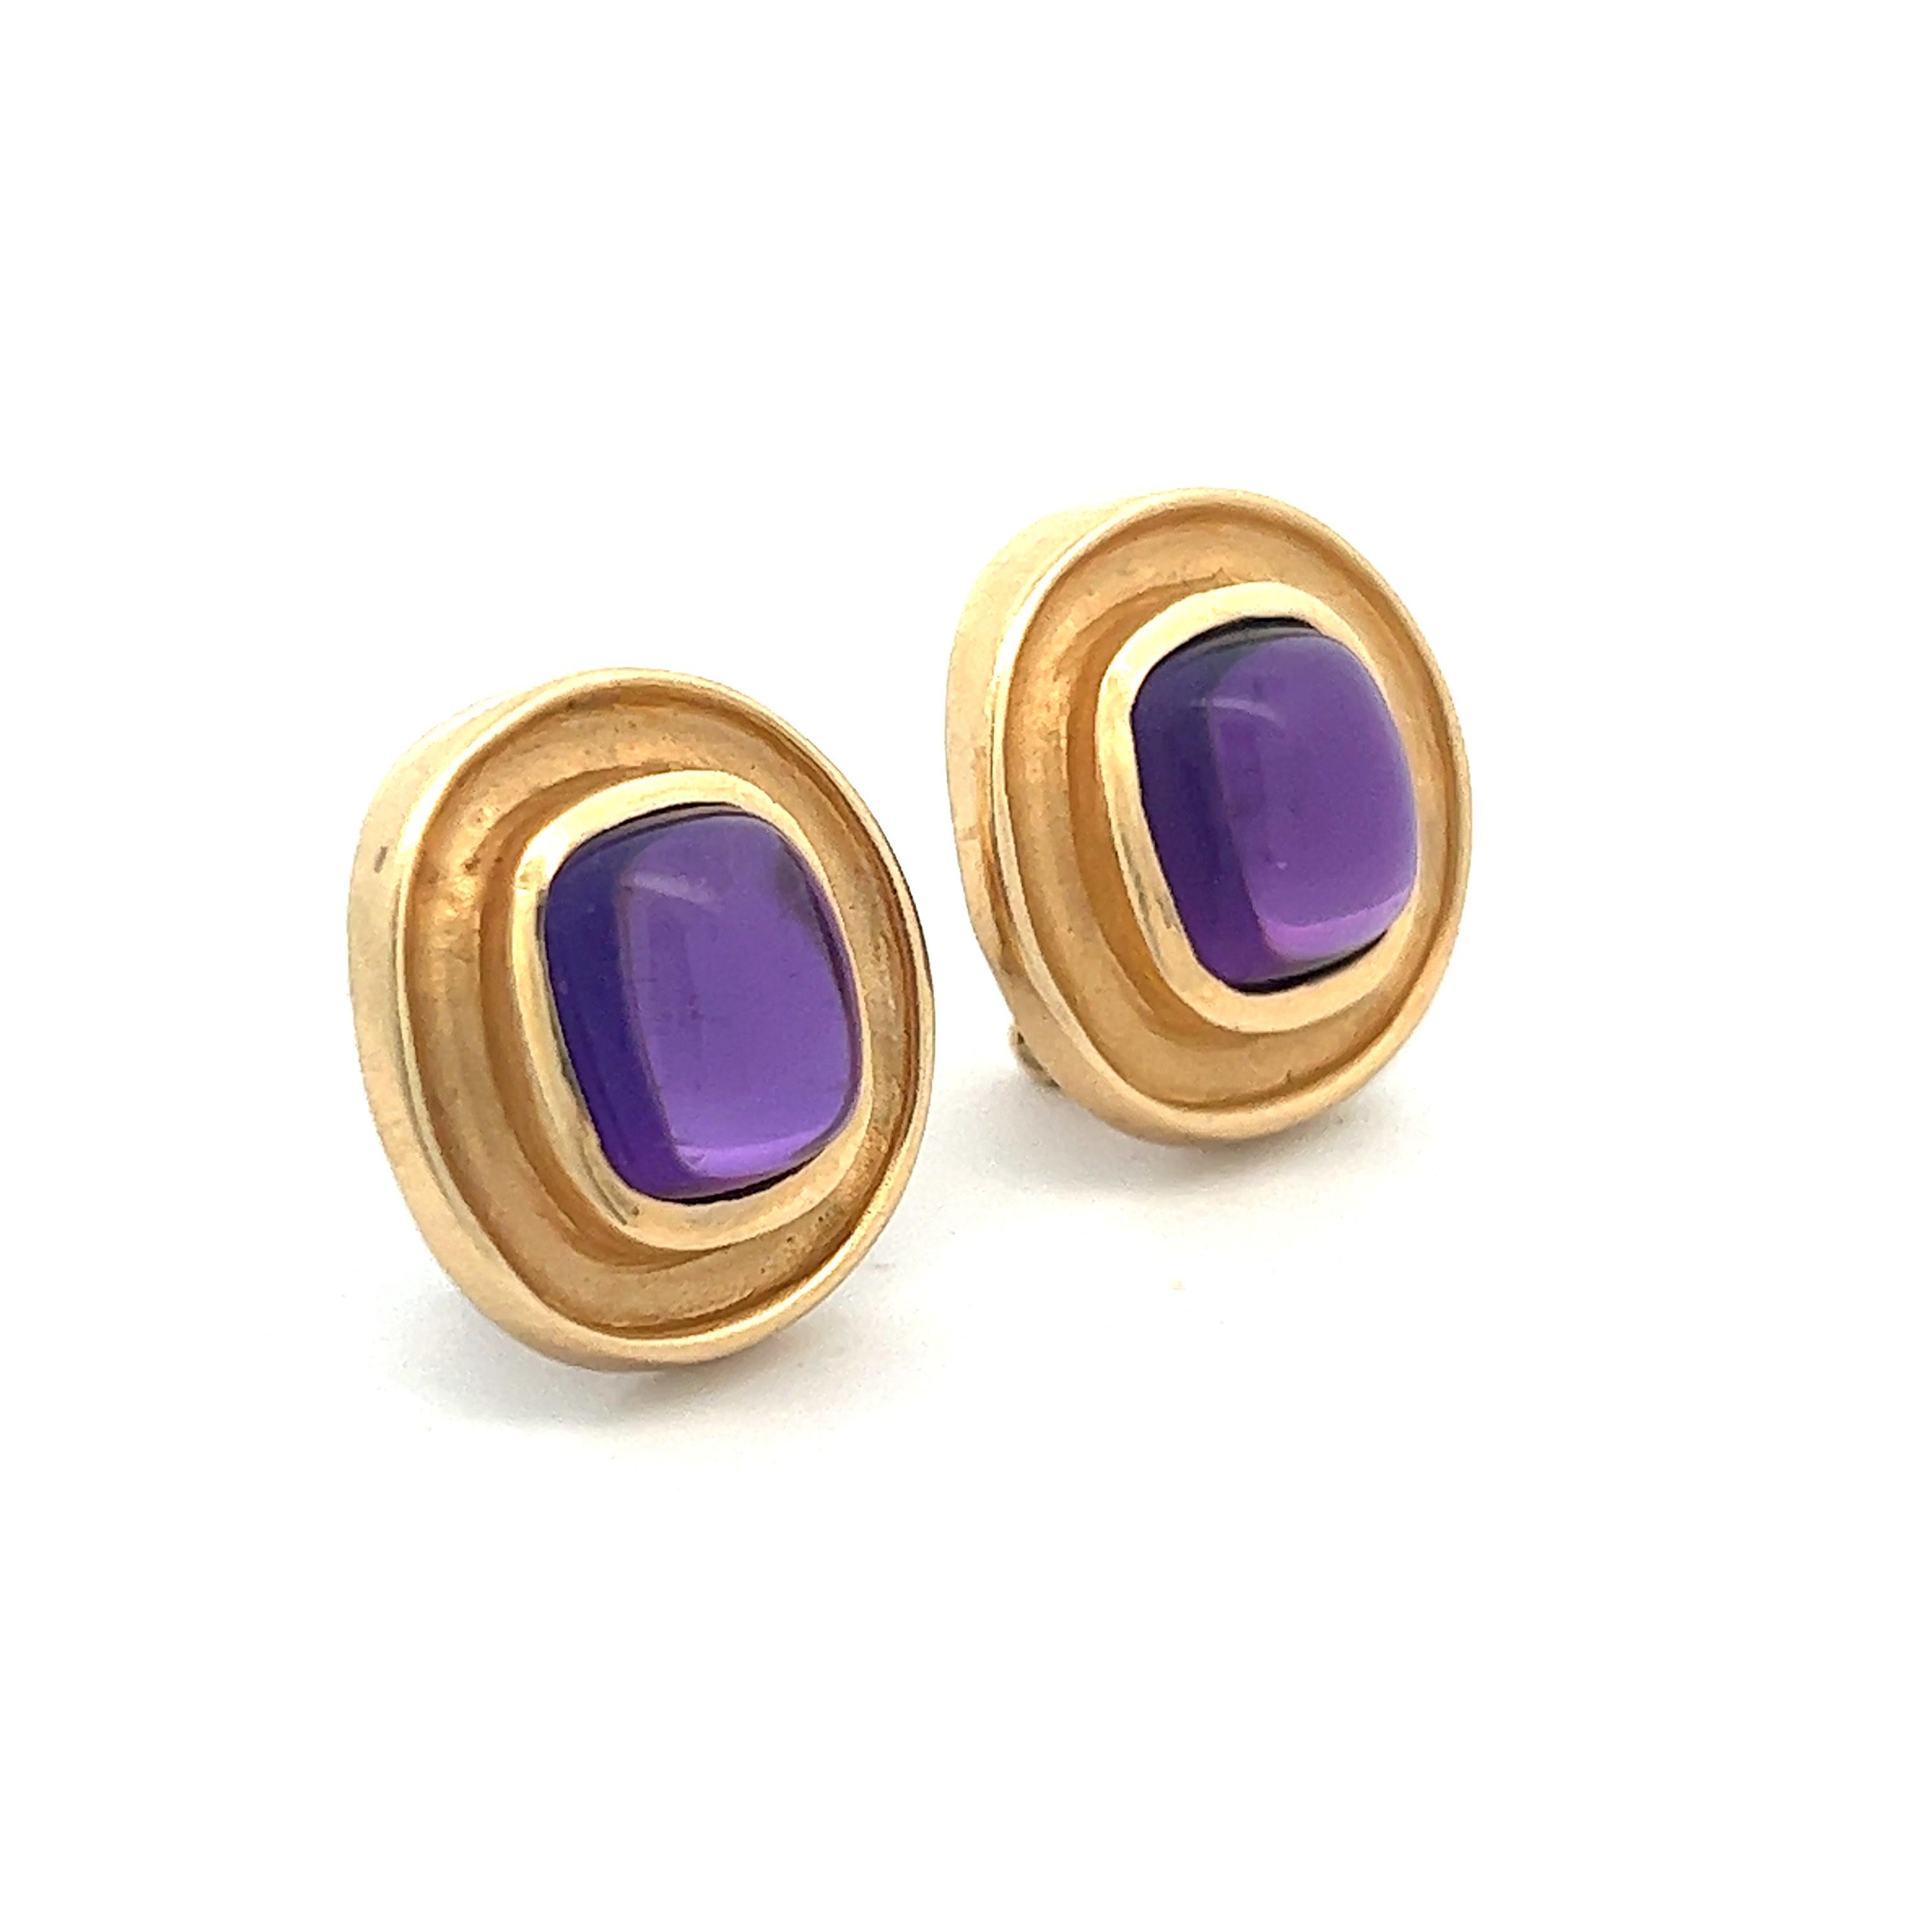 A beautiful pair of cabochon amethysts set in 14k yellow gold French clip earrings. The earrings are approximately 0.75 inches tall and the amethysts within weigh approximately 4.5 cts each (9 ctw). 